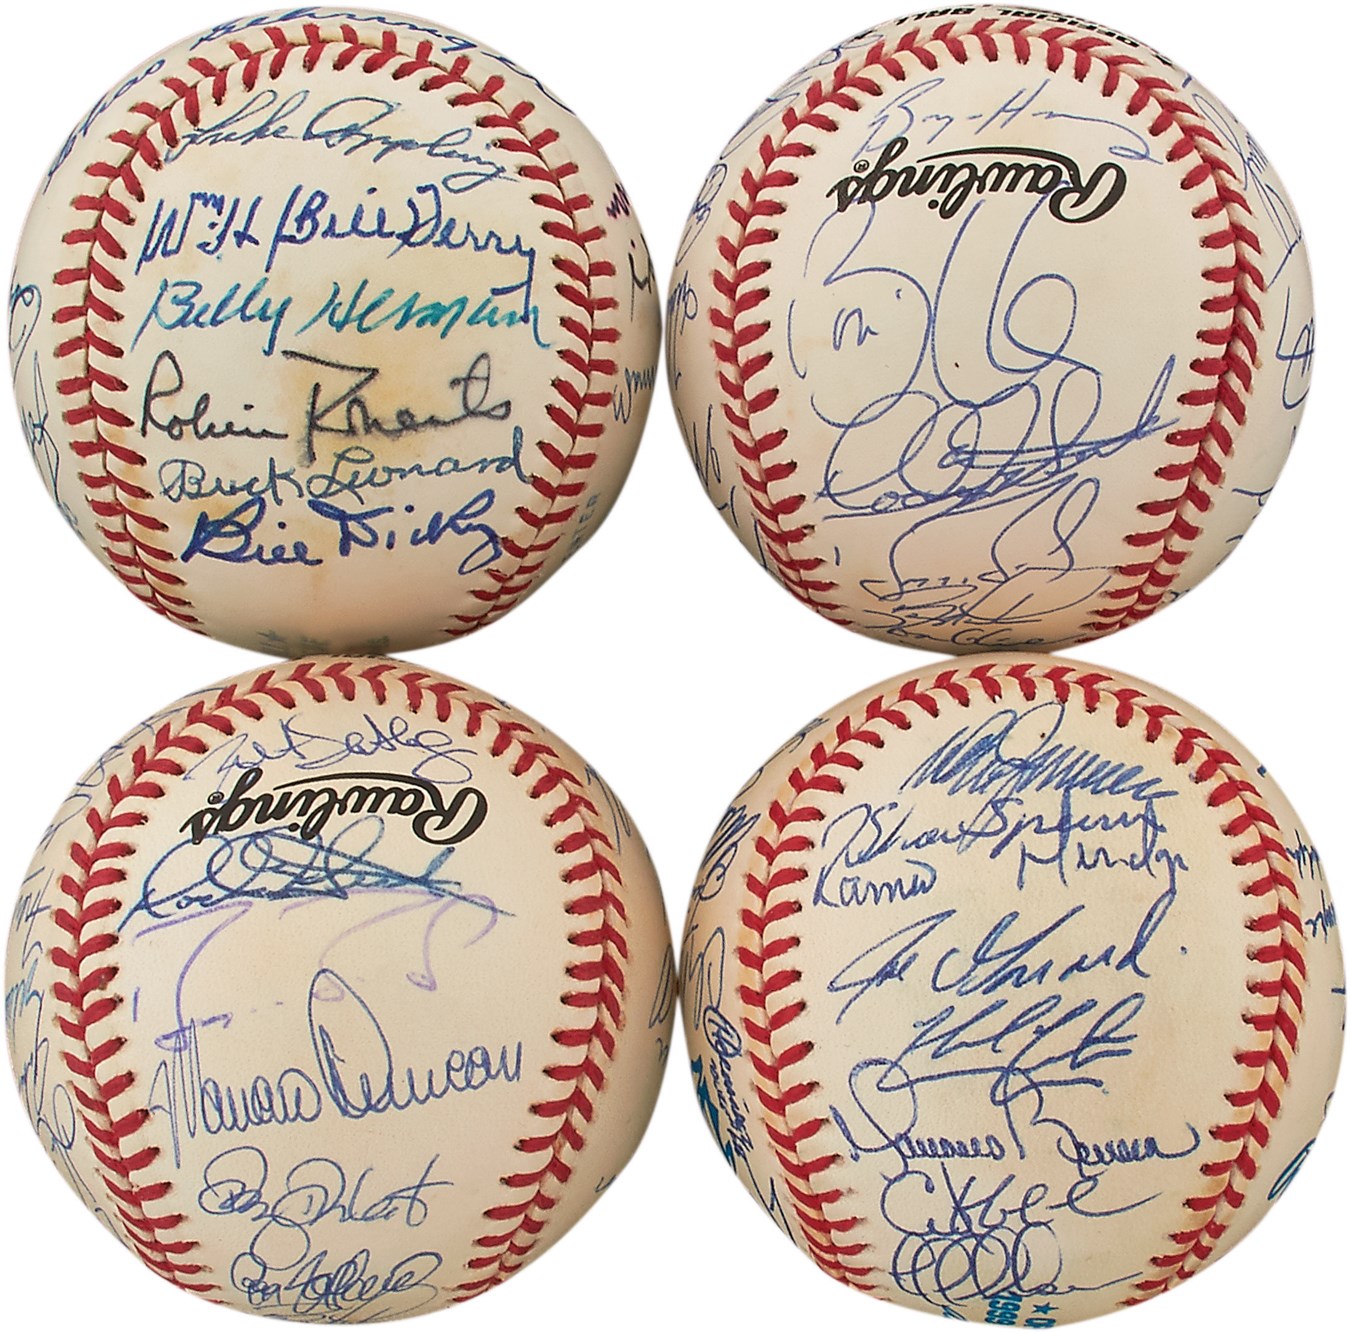 Interesting Hall of Fame, All-Star and Team-Signed Baseballs (4)